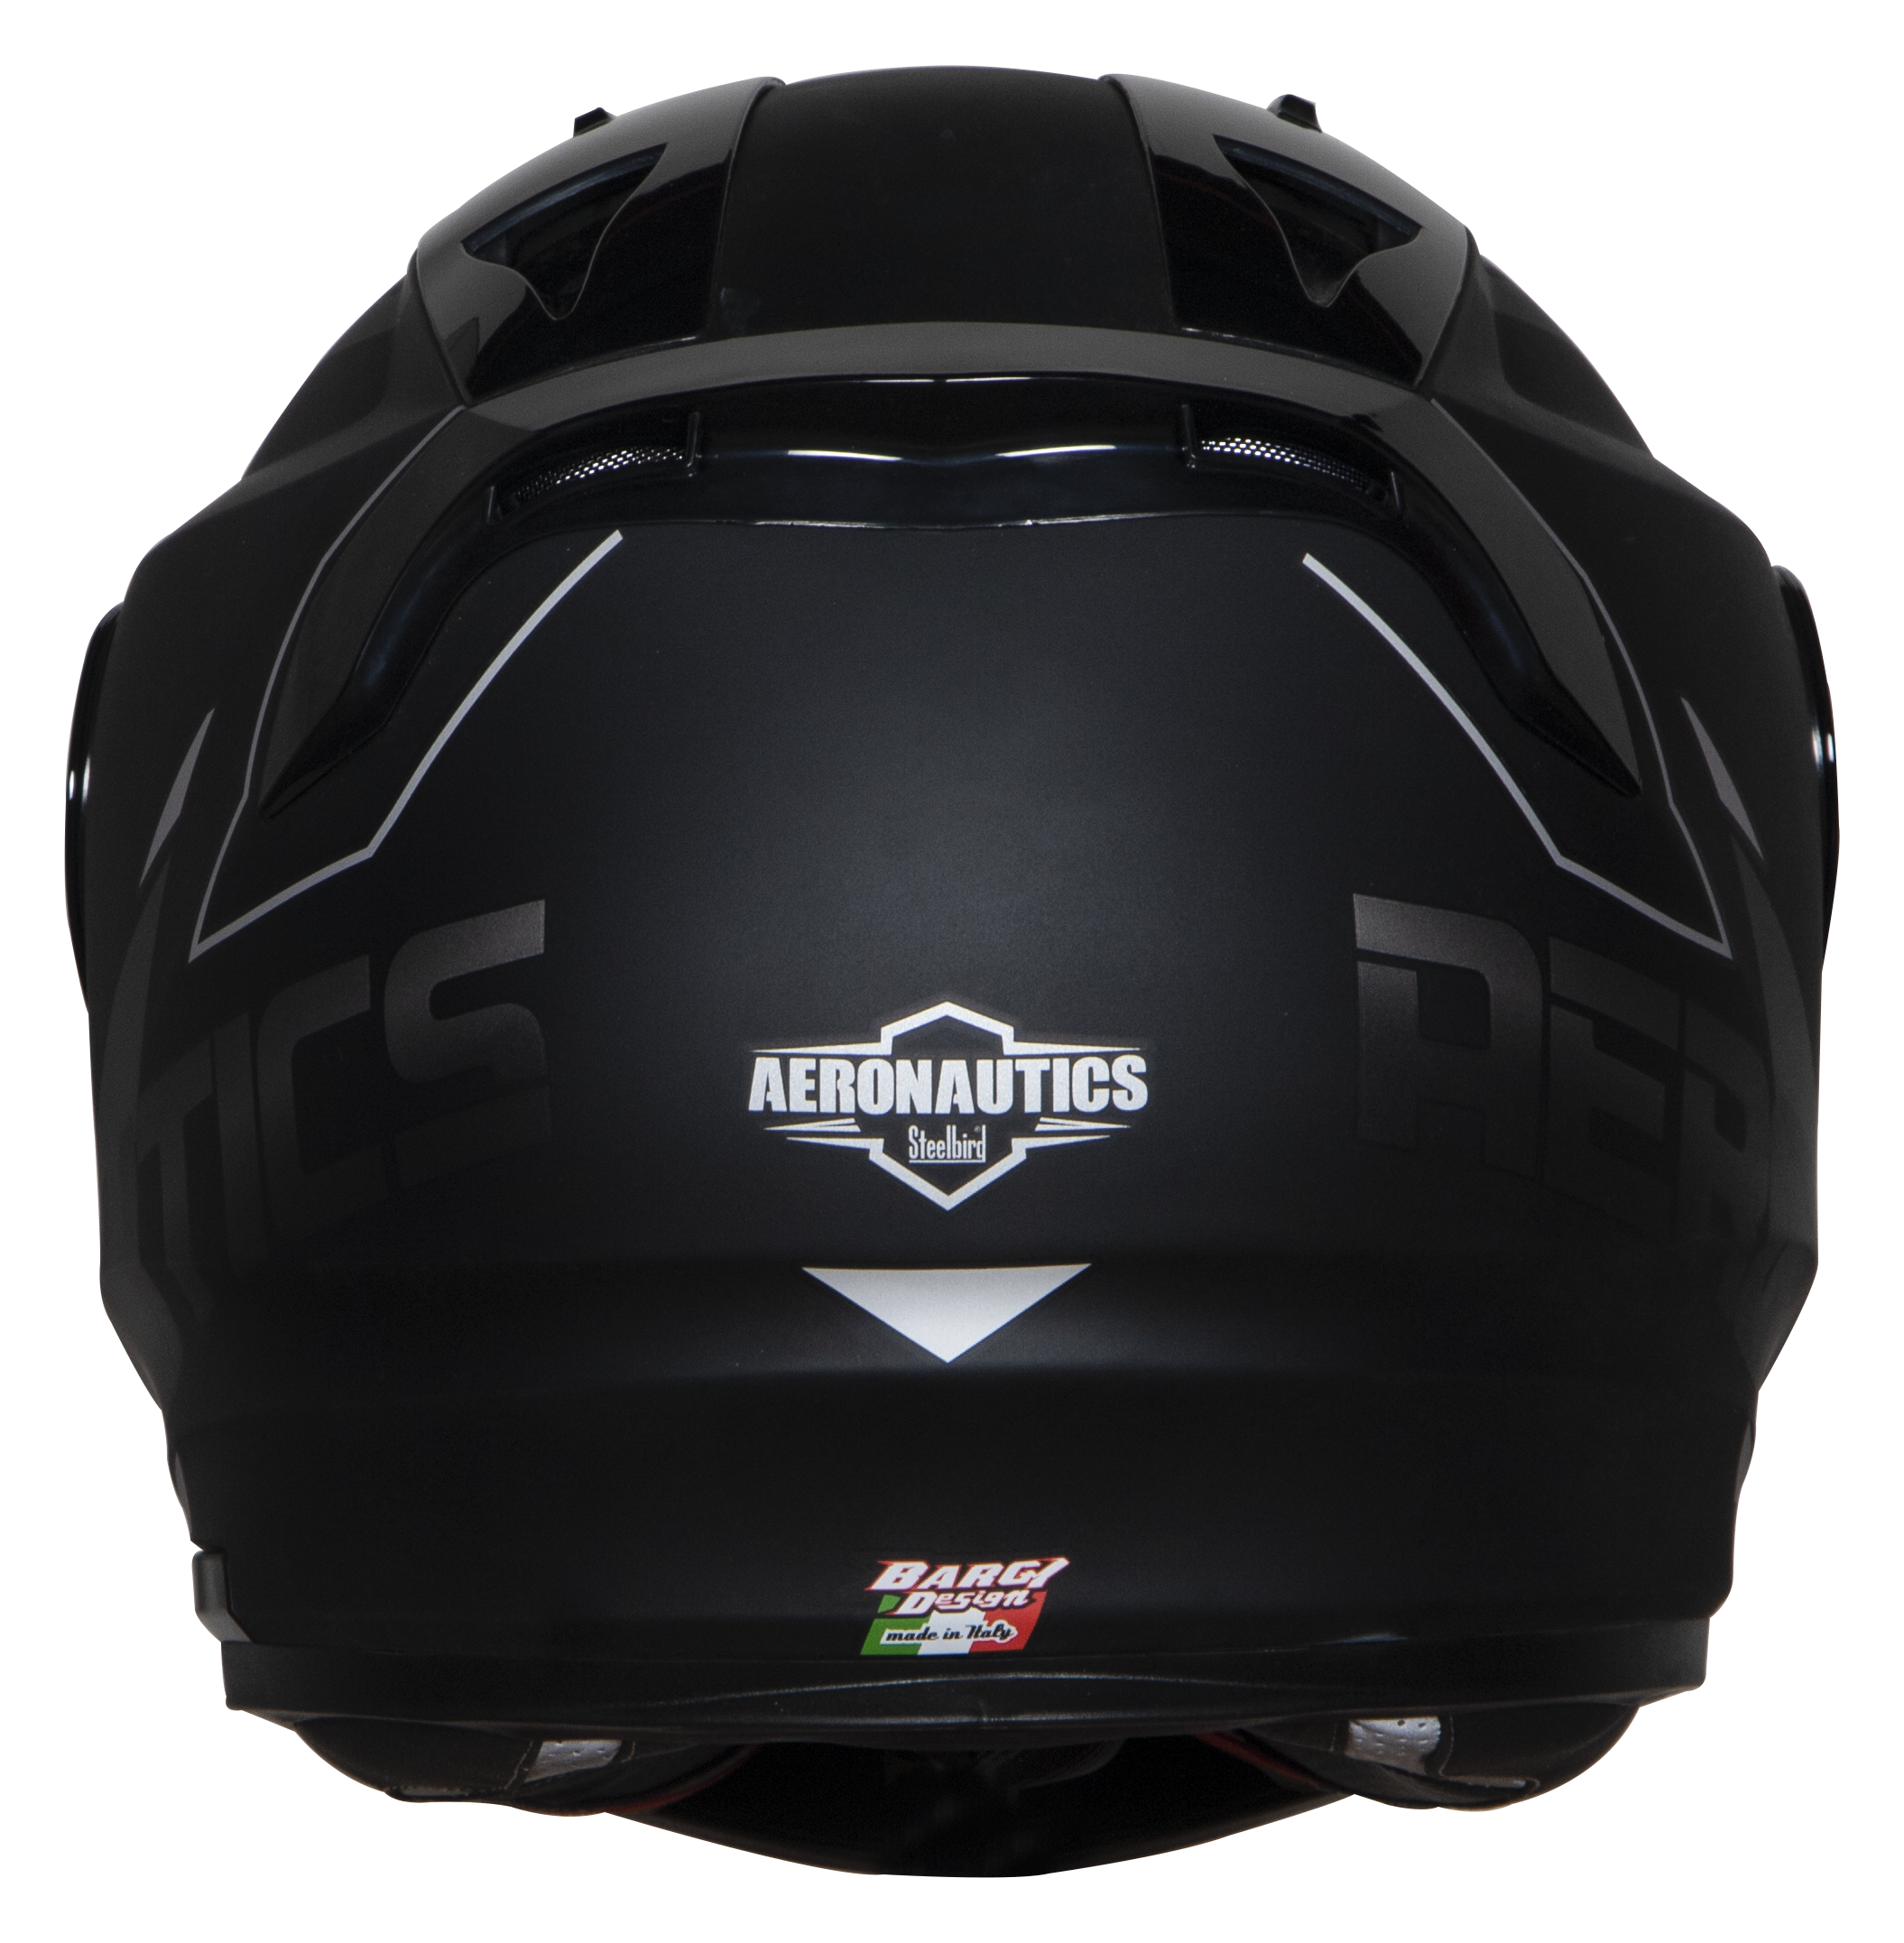 SA-1 RTW Mat Black/White With Anti-Fog Shield Gold Night Vision Visor(Fitted With Clear Visor Extra Gold Night Vision Anti-Fog Shield Visor Free)